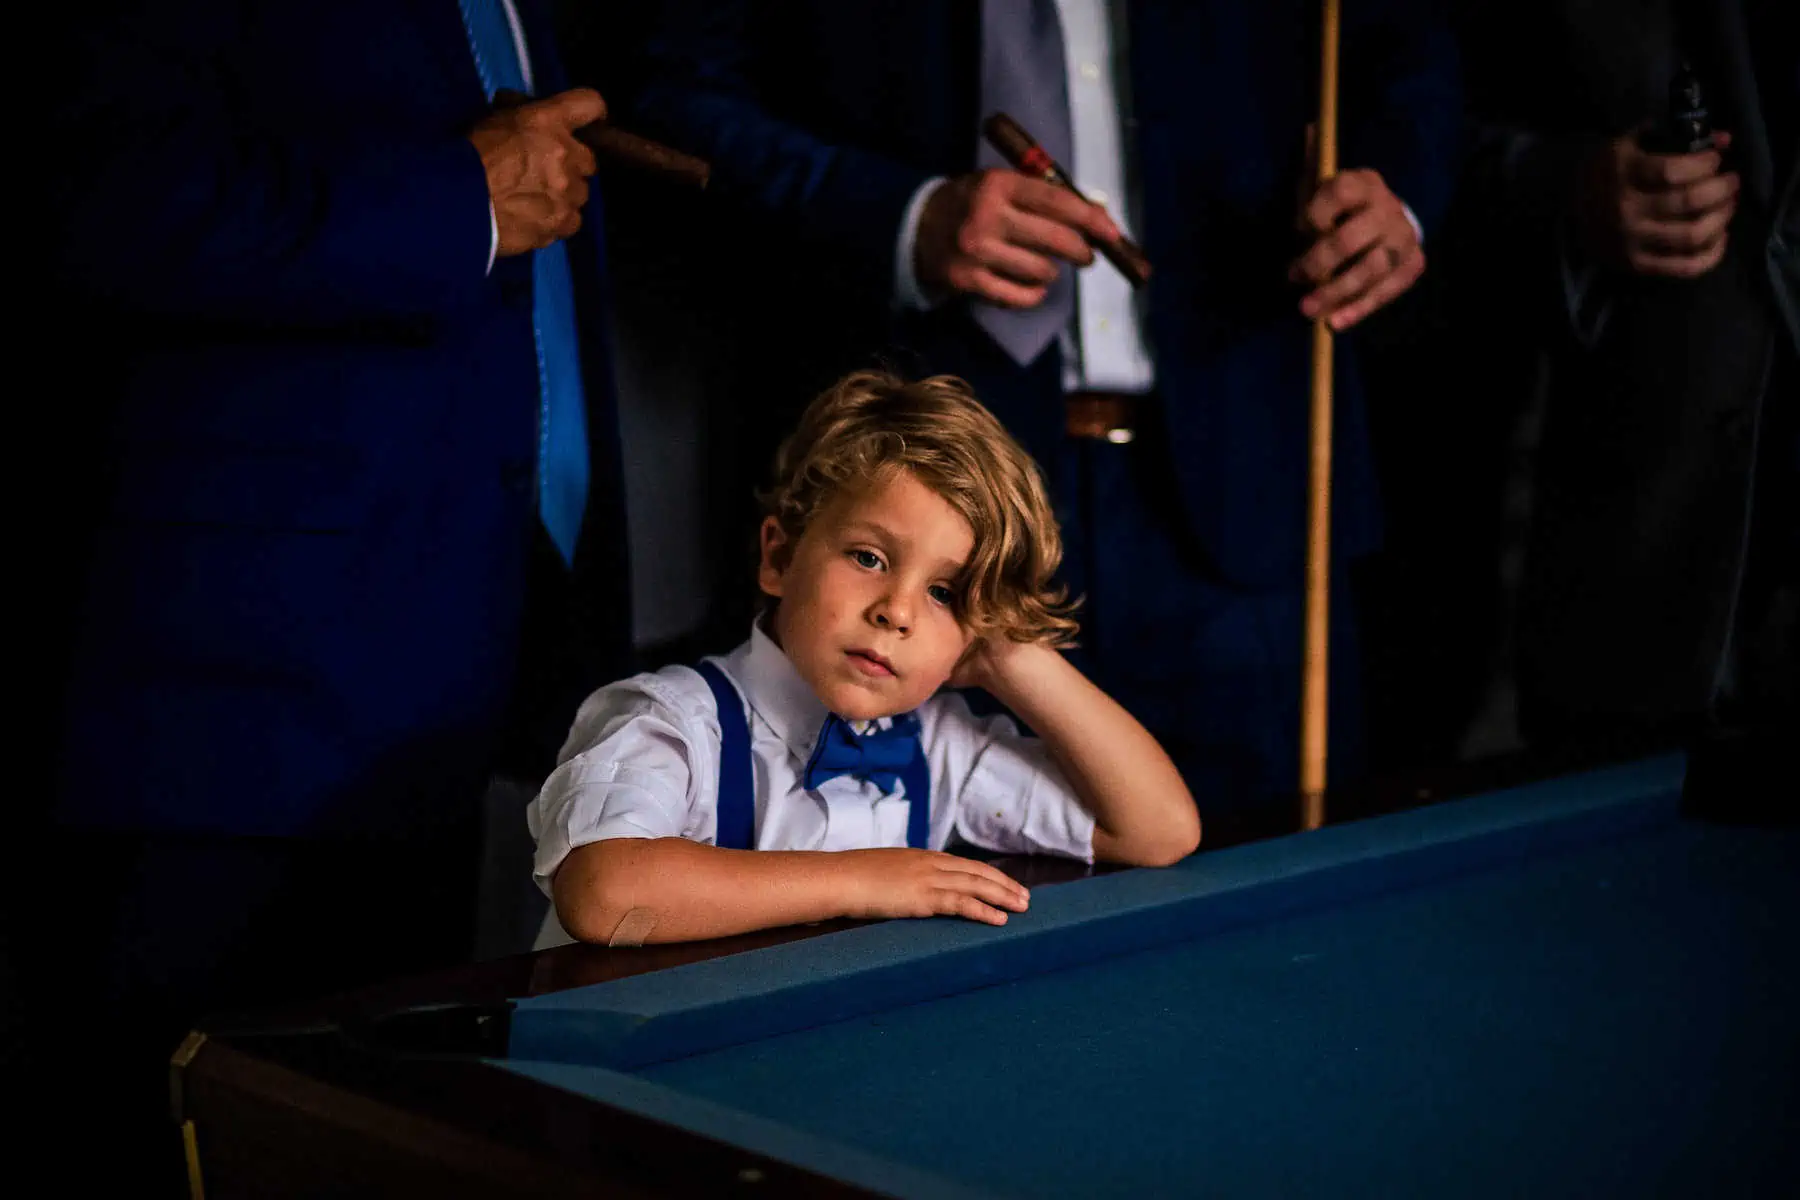 A young boy leaning over a pool table.